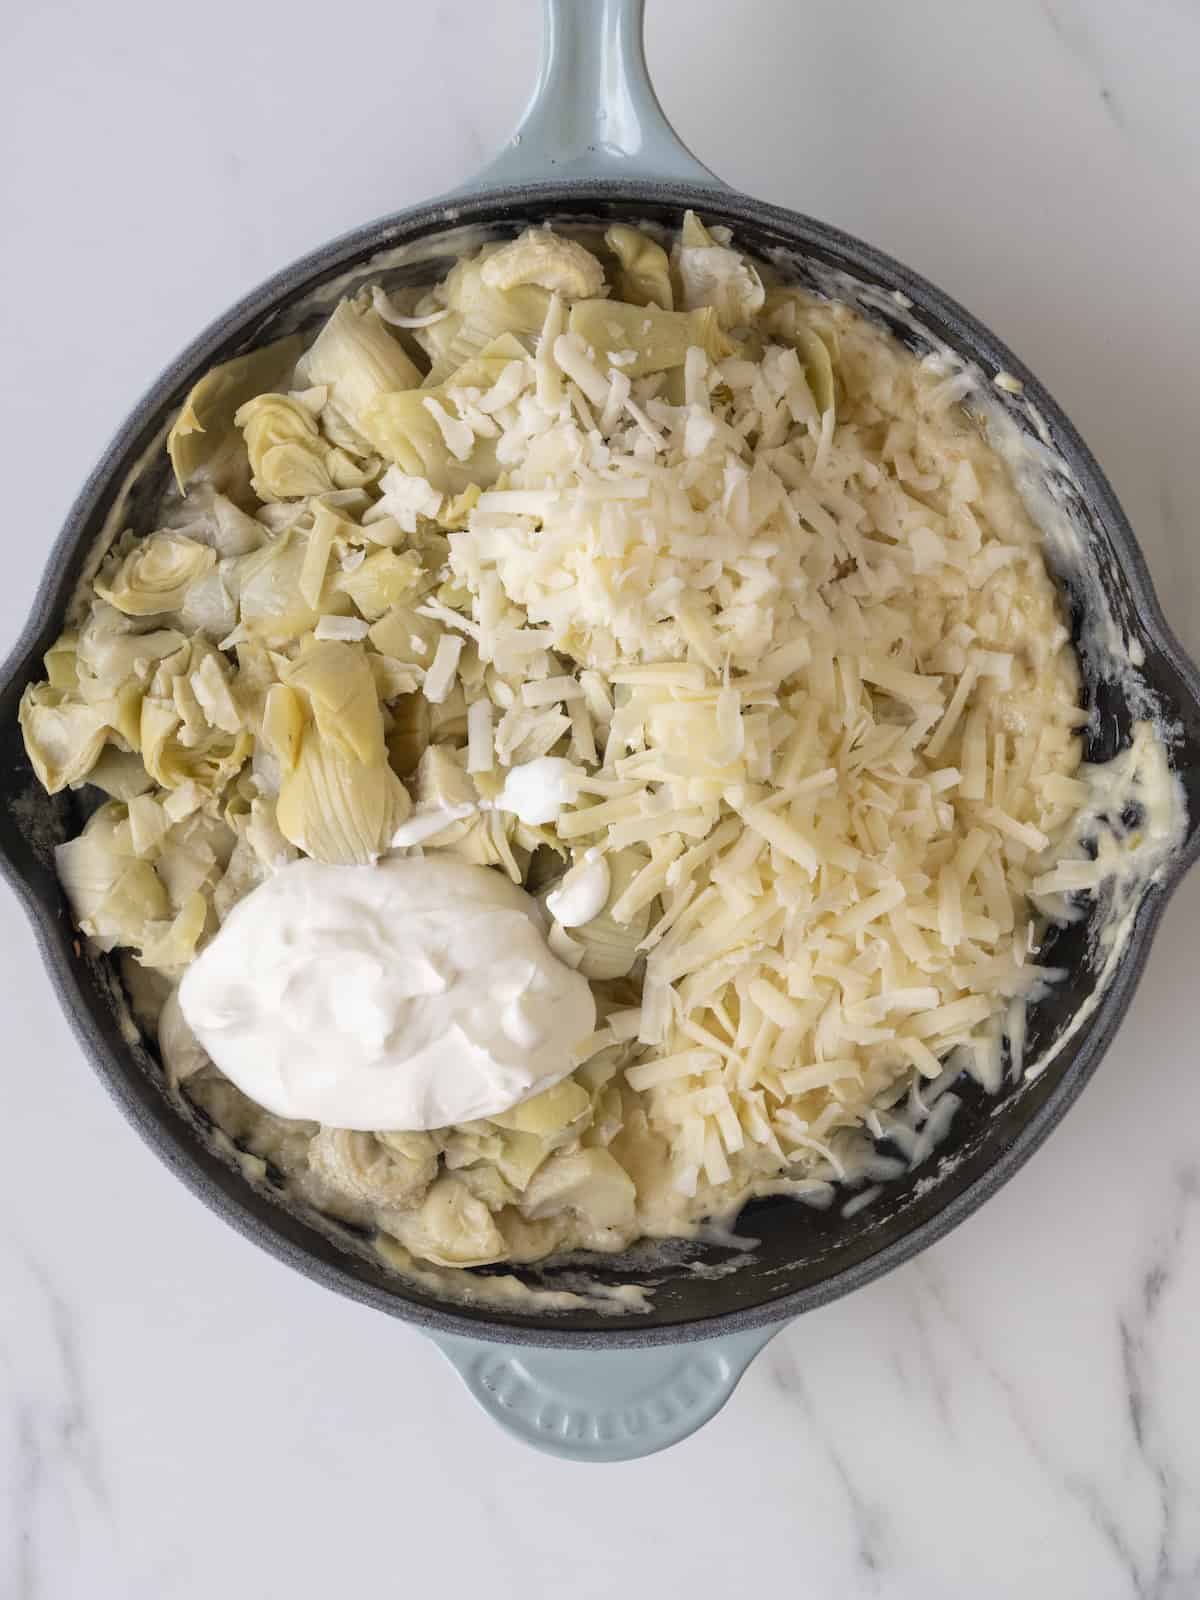 A skillet with grated cheeses, artichoke hearts and sour cream just added.